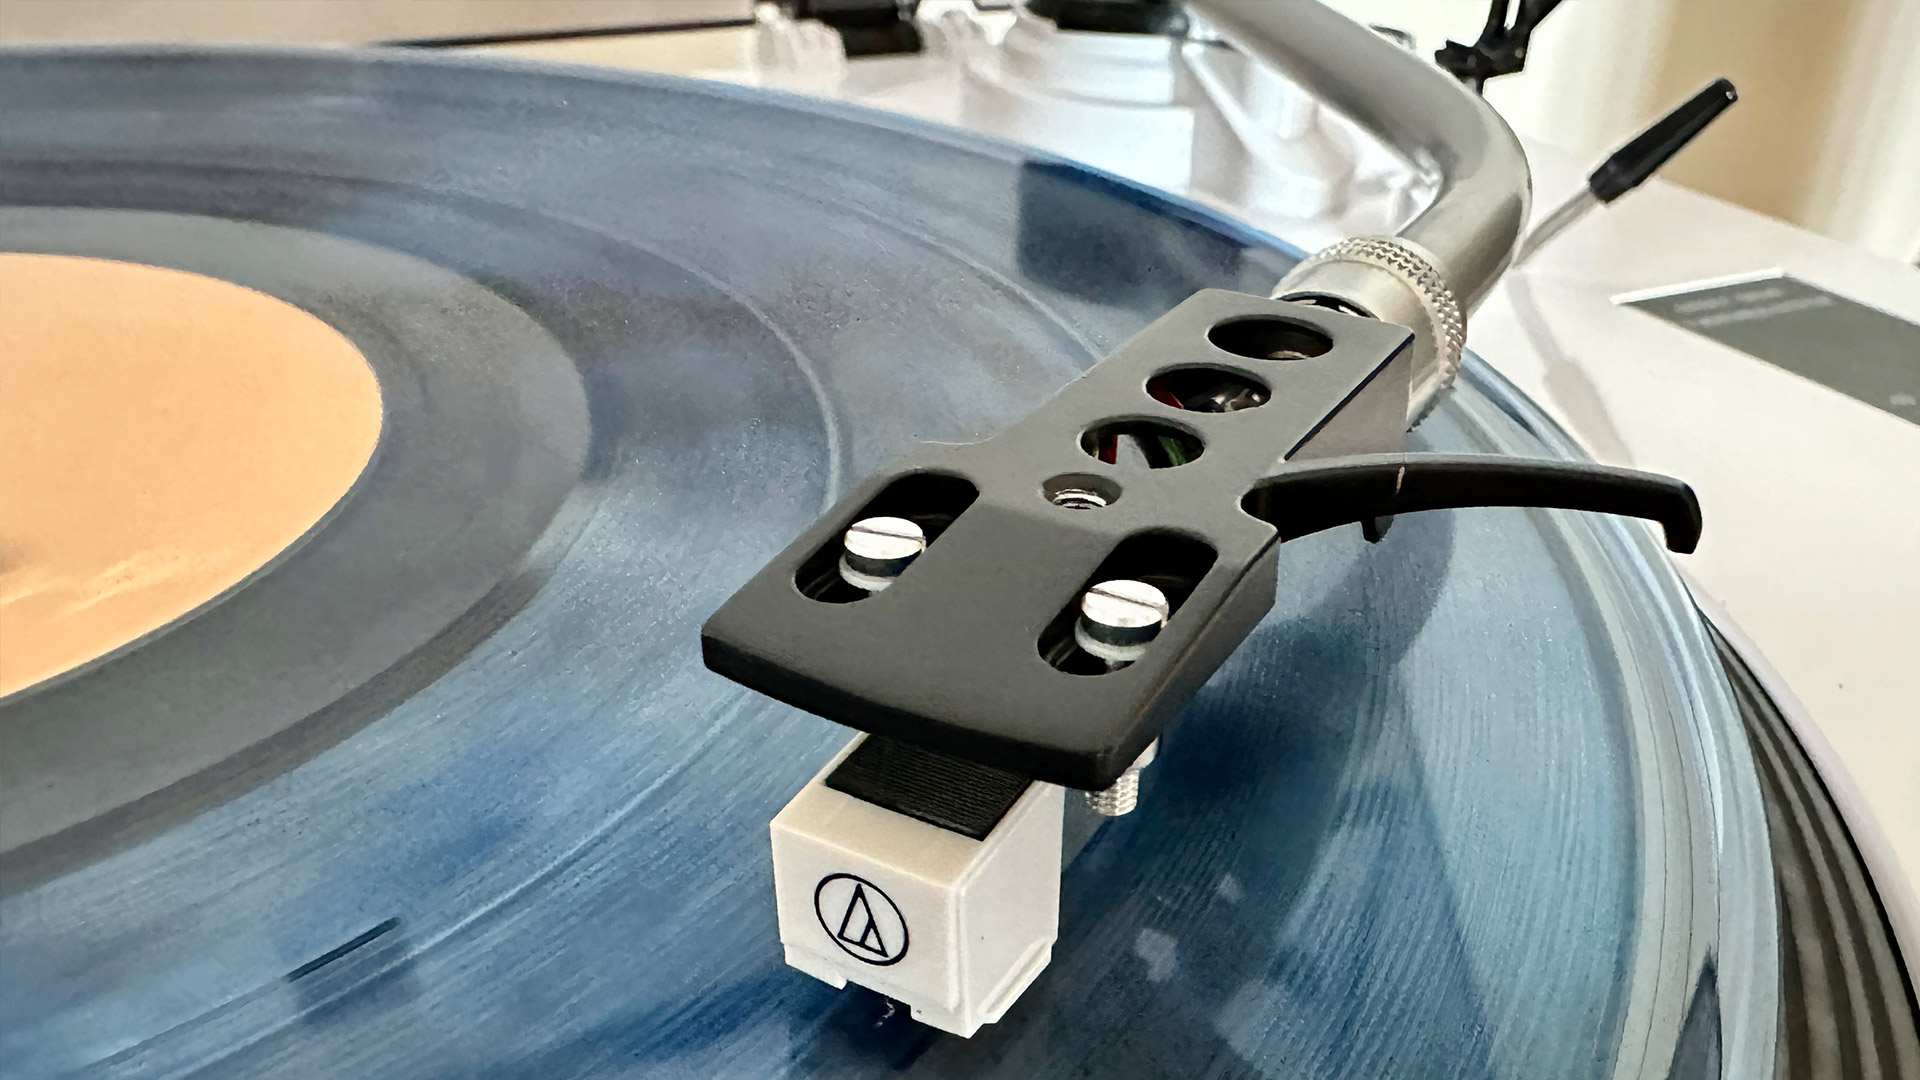 The Lenco L-3180 playing a record